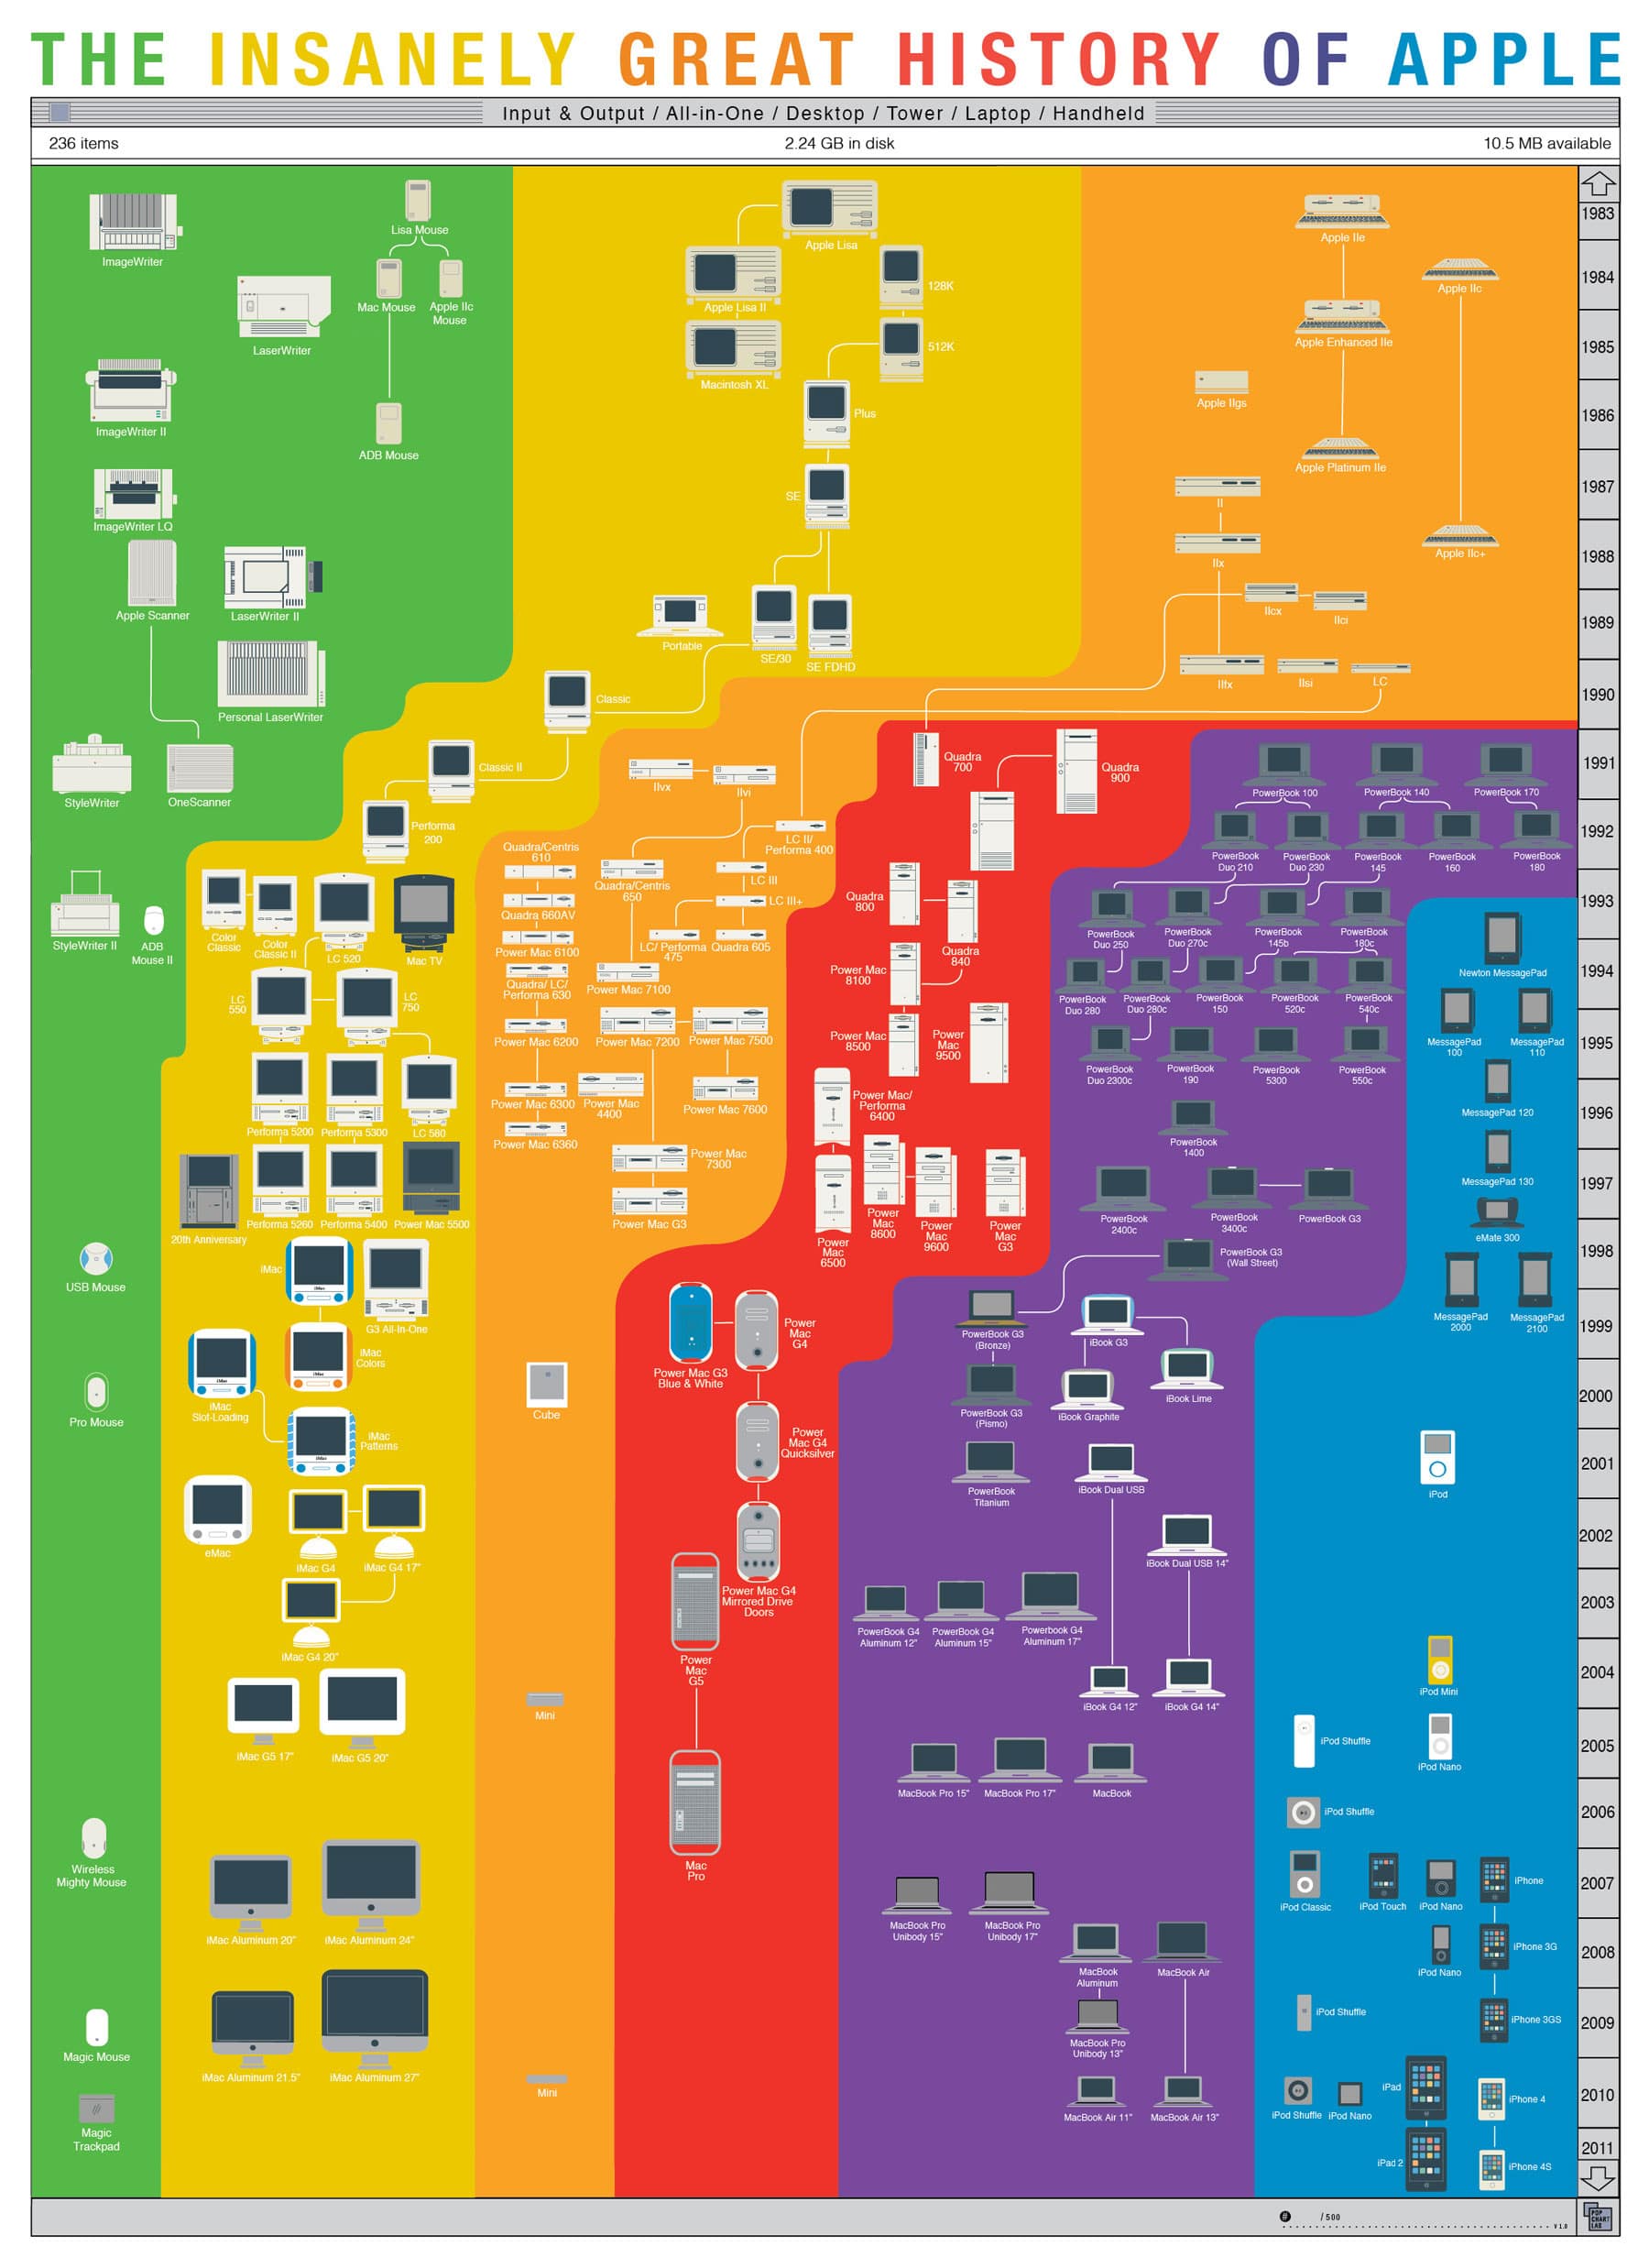 The Insanely Great Visual History Of Apple [Infographic]